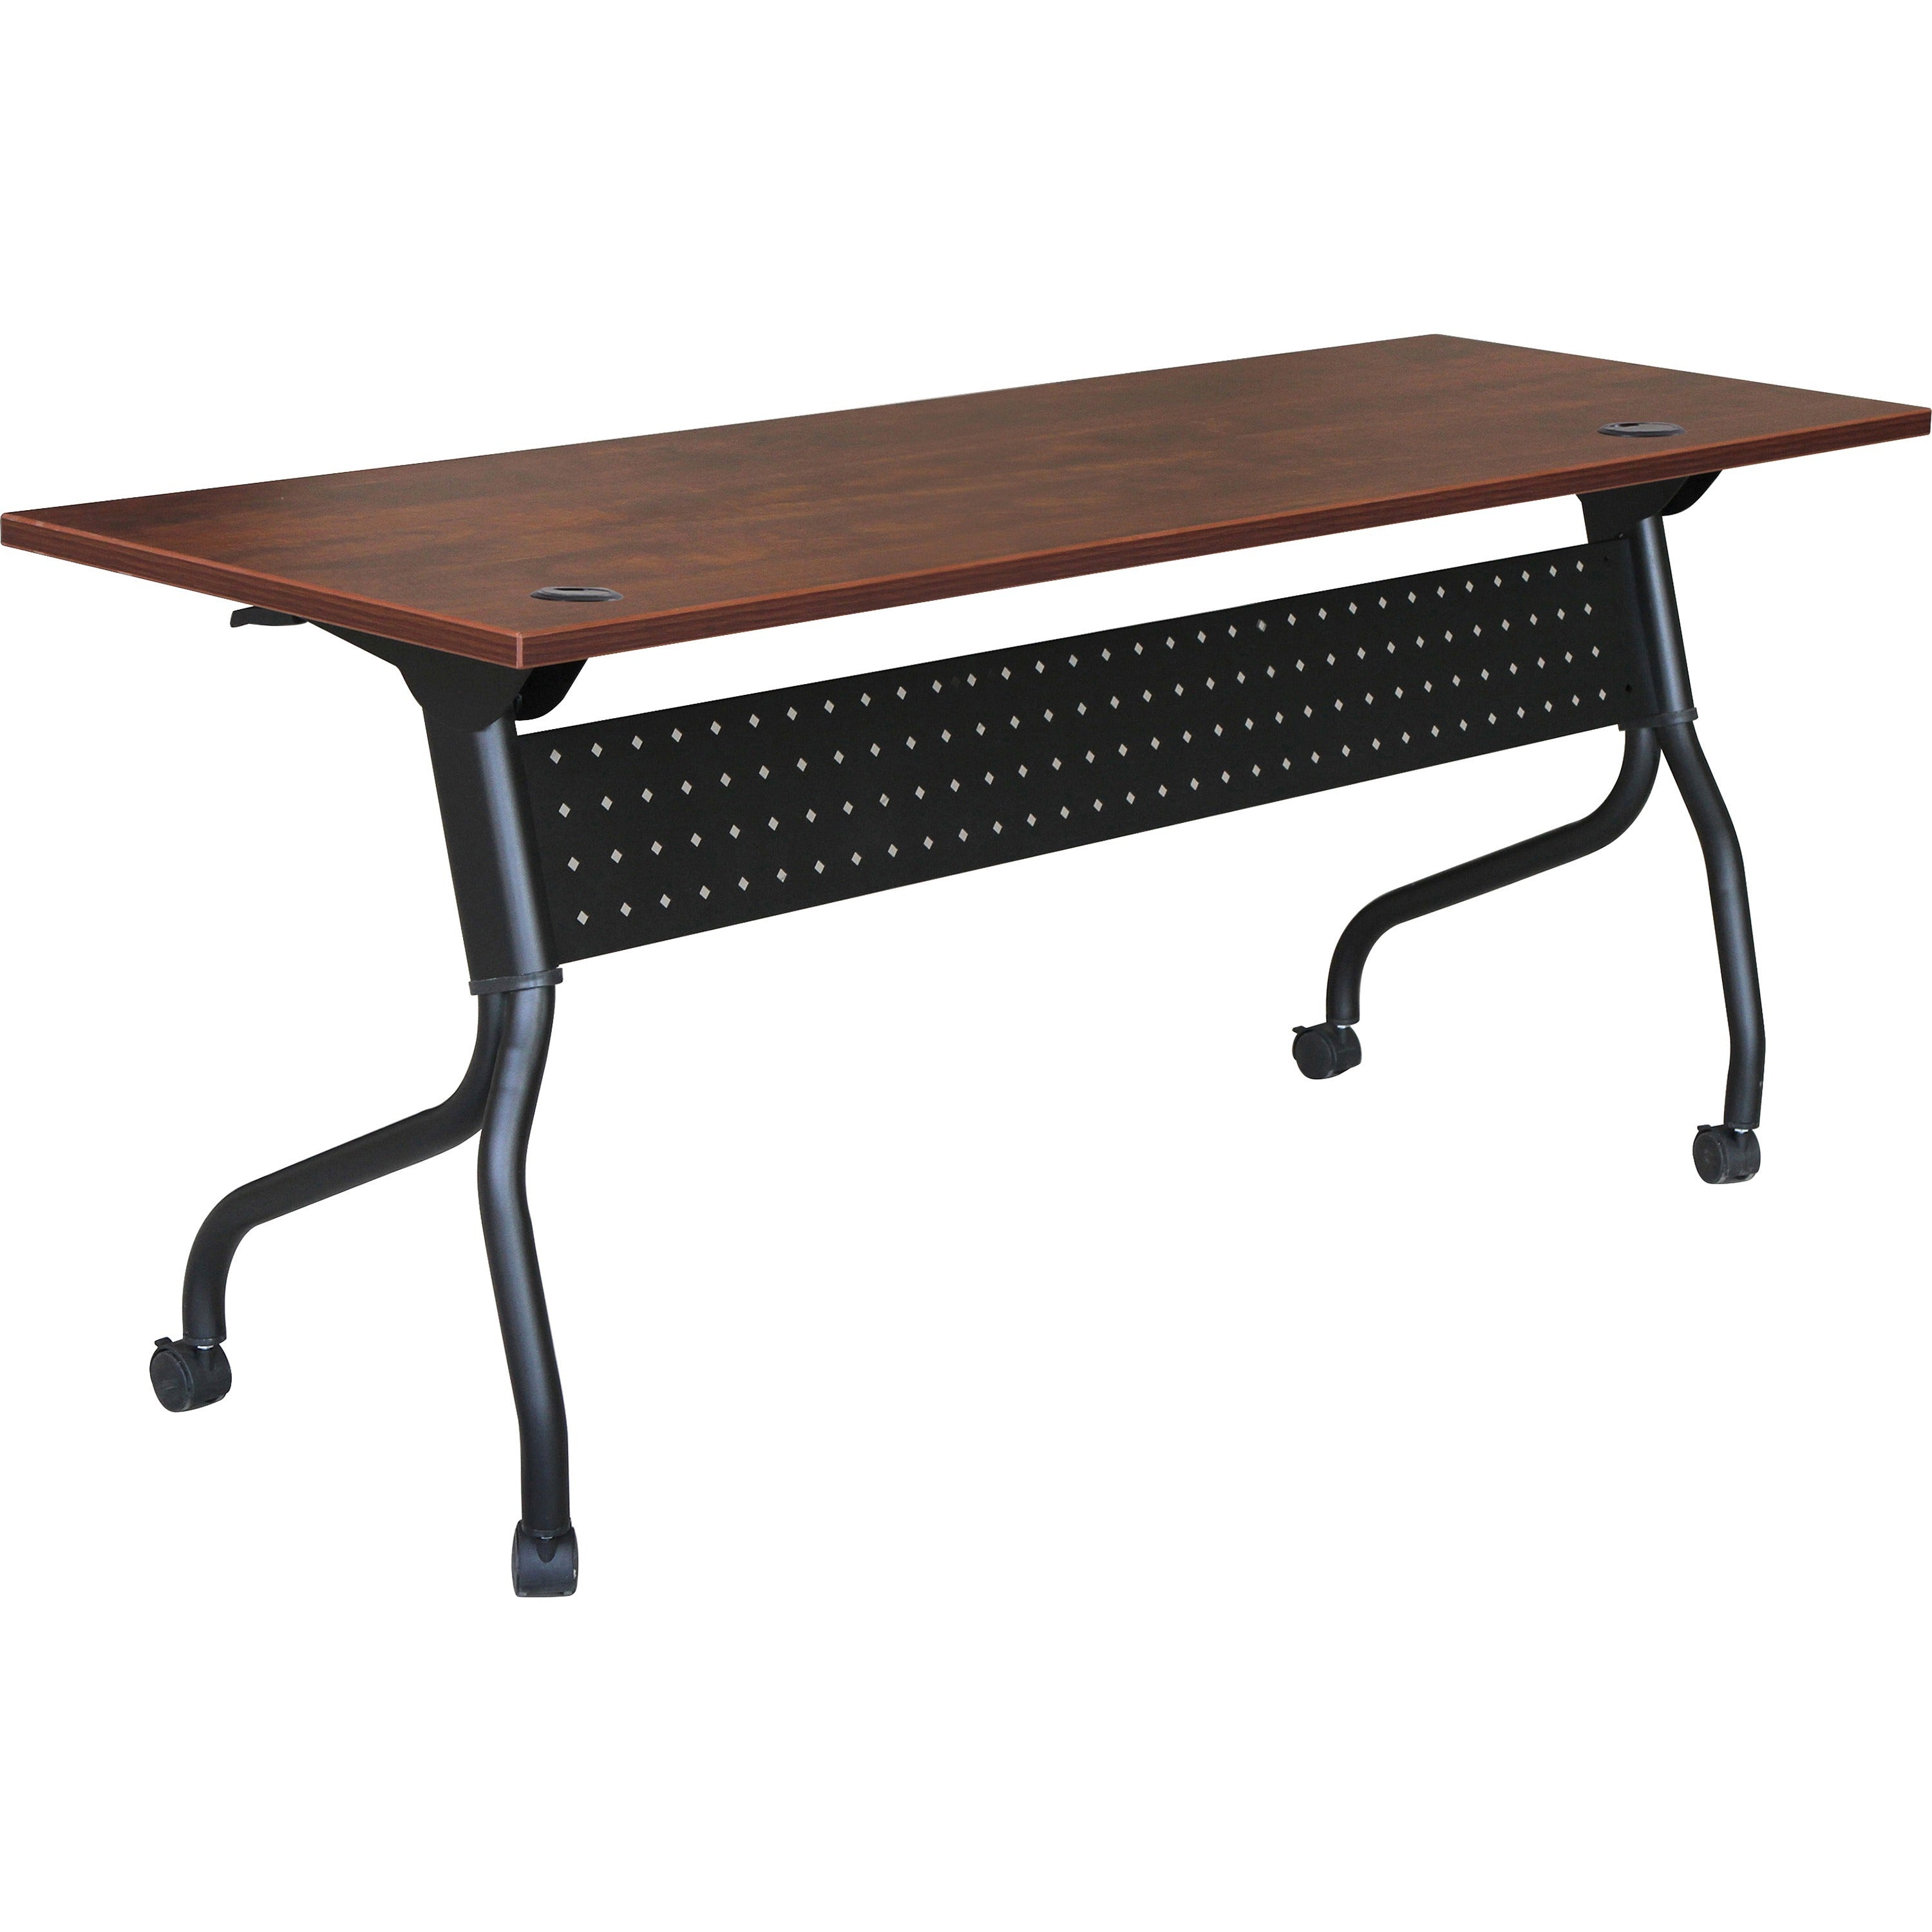 Lorell Flip Top Training Table - For - Table TopRectangle Top - Four Leg Base - 4 Legs x 72" Table Top Width x 23.60" Table Top Depth - 29.50" Height x 28.70" Width x 23.63" Depth - Assembly Required - Cherry - Melamine, Nylon - 1 Each - 